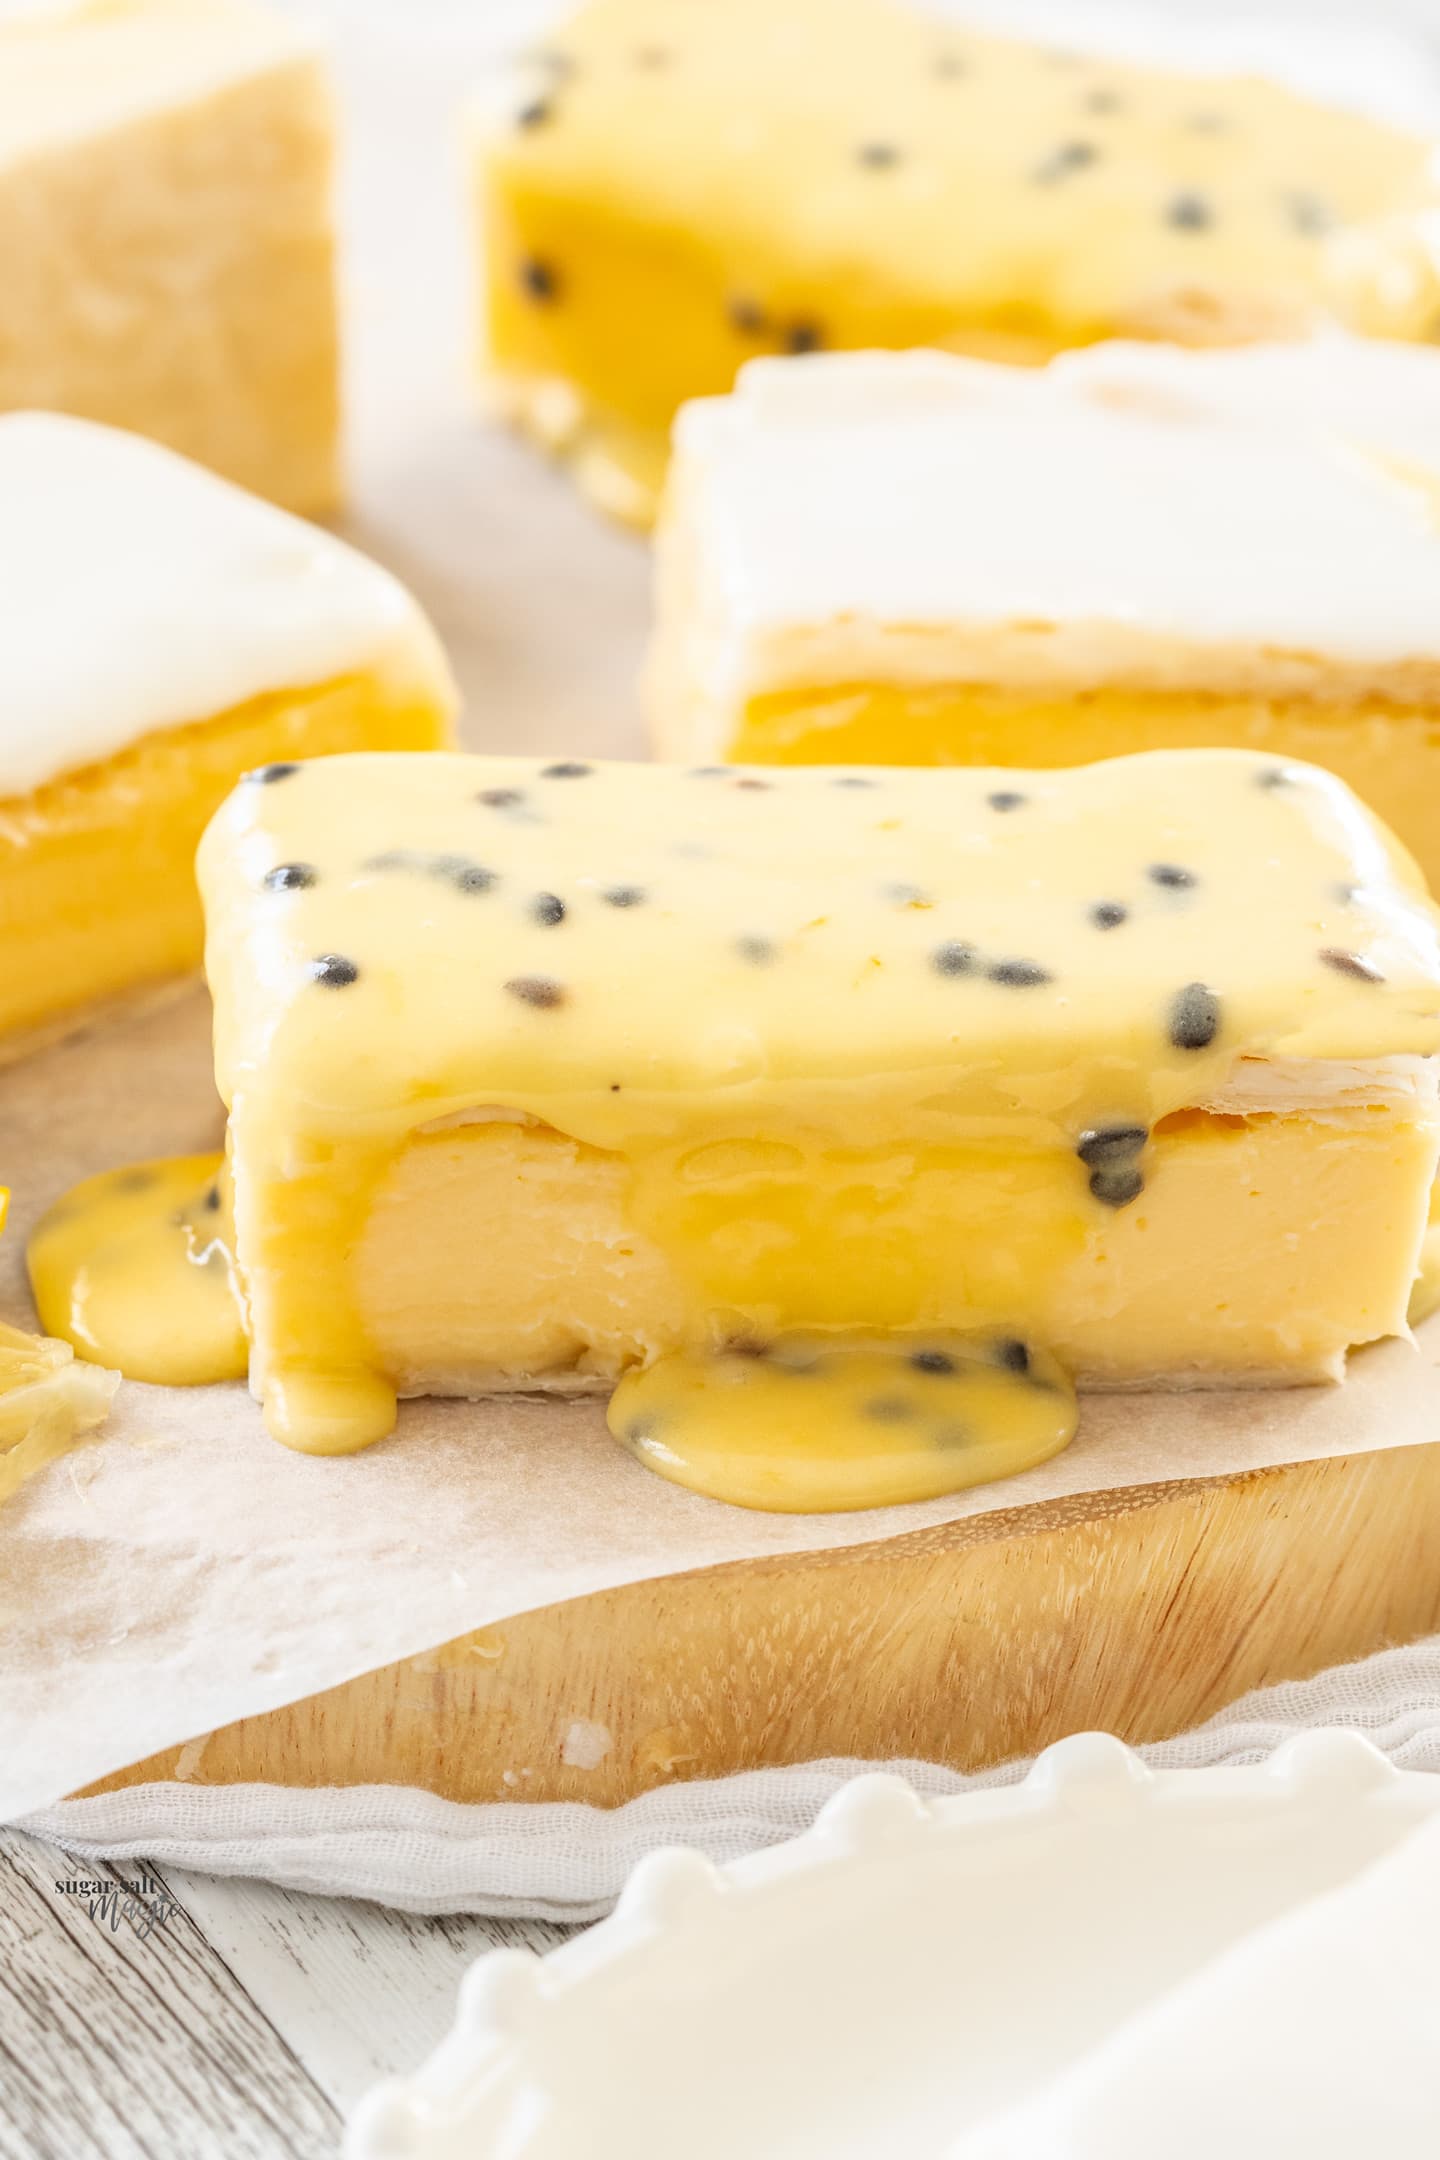 Closeup of a vanilla custard sliced topped with passionfruit icing.